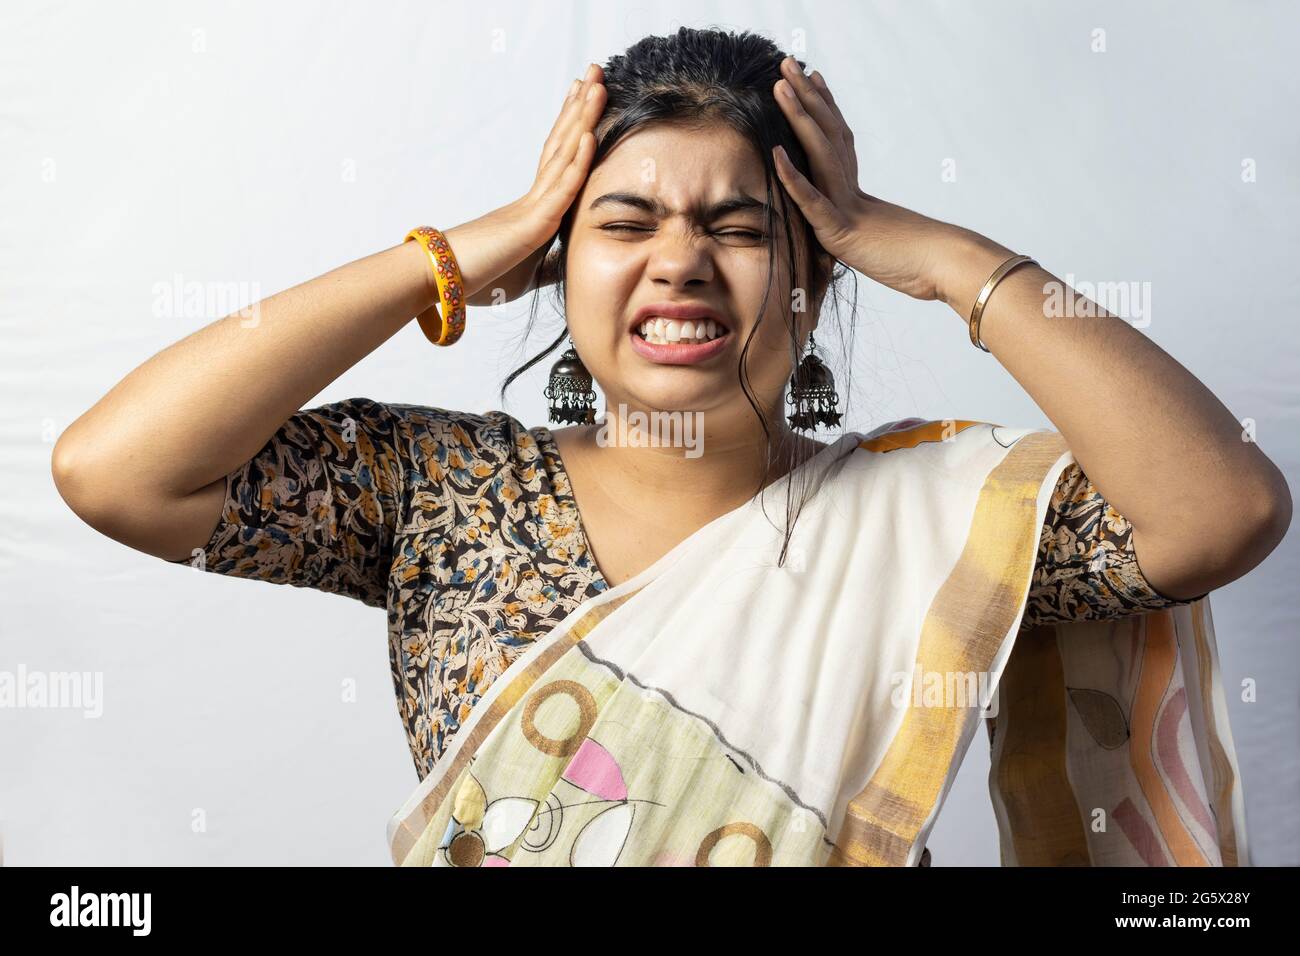 Isolated on white background an Indian woman in saree holding head for headache; sign of migraine Stock Photo